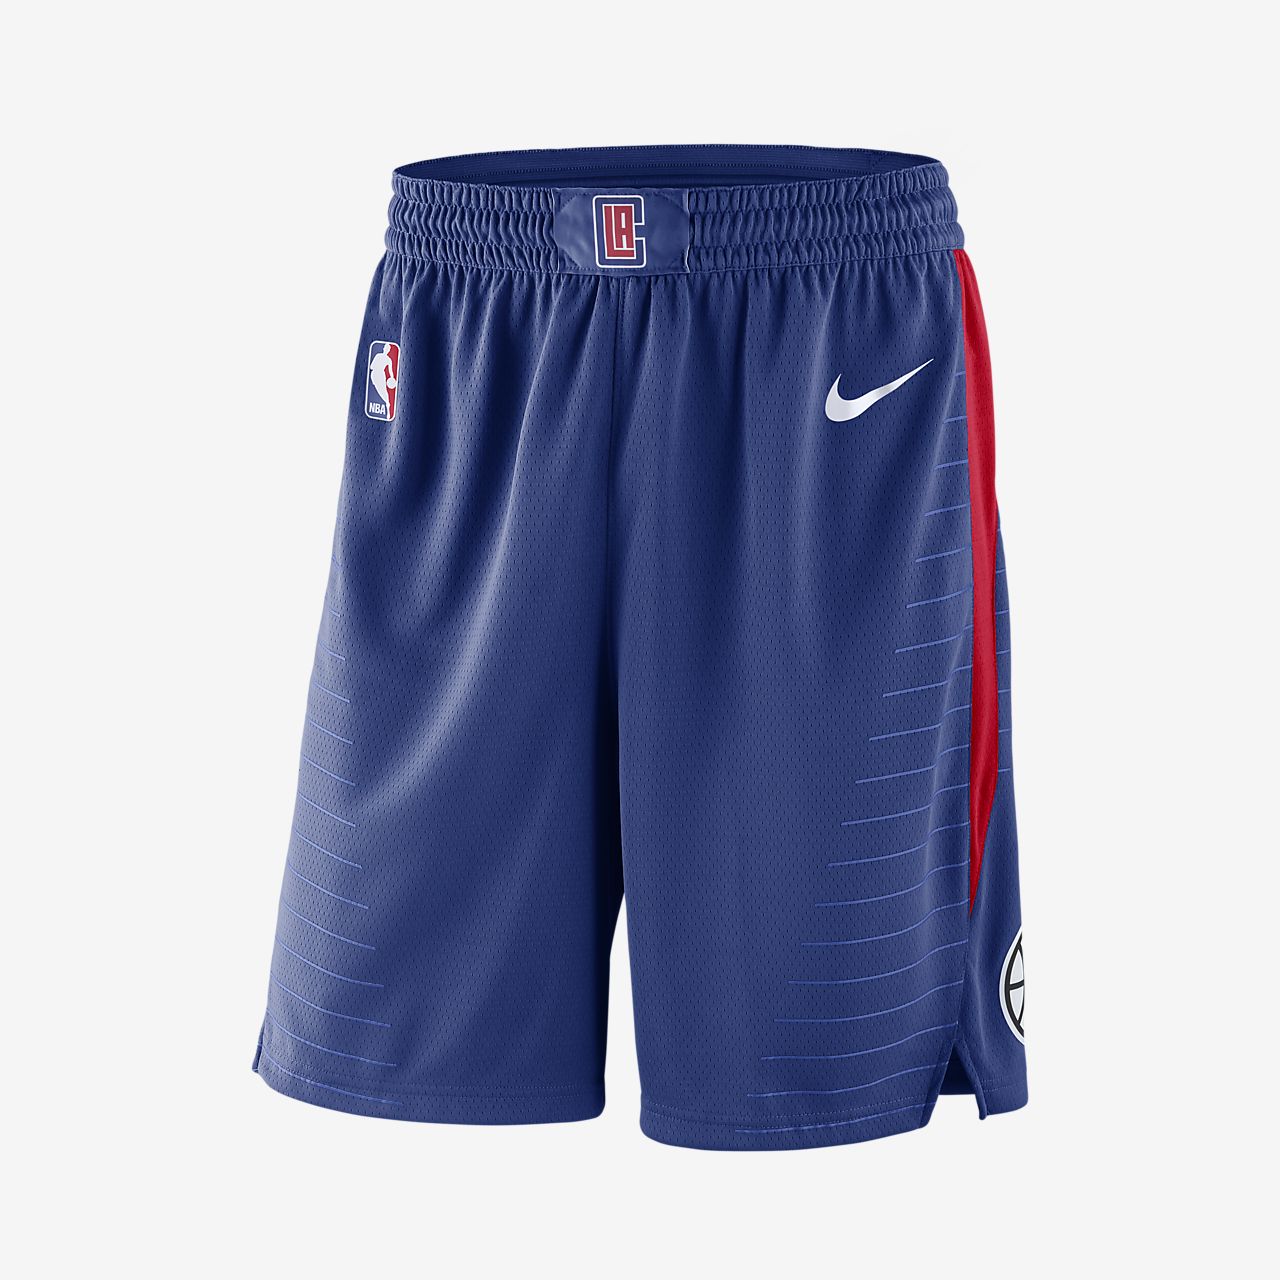 la clippers jersey and shorts